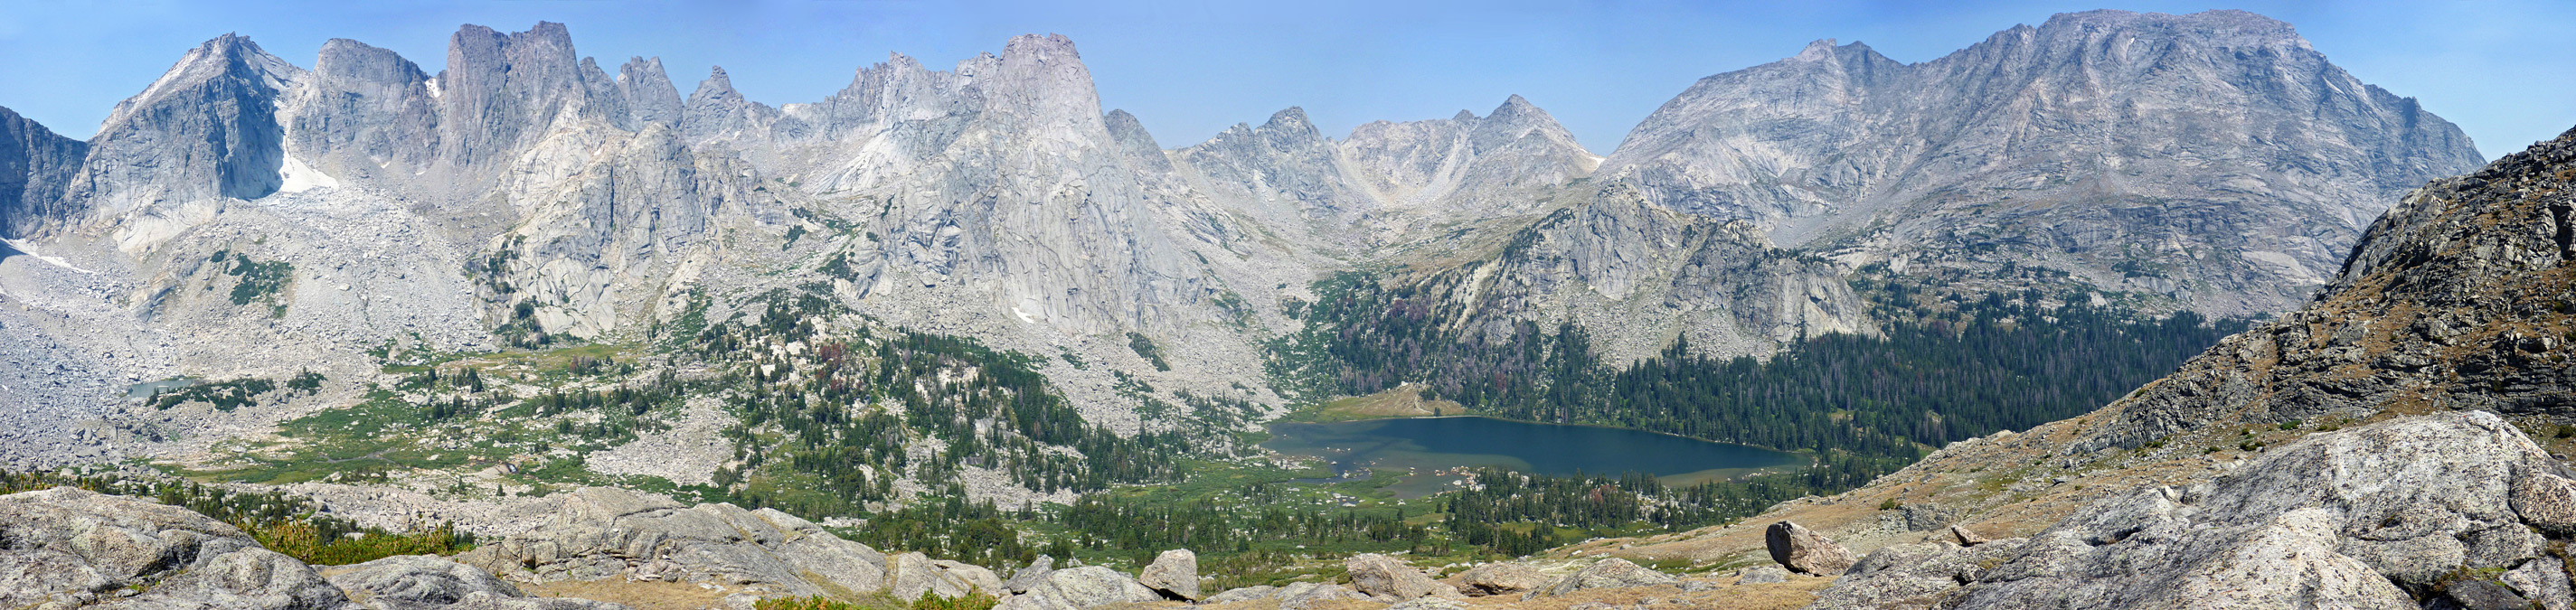 Cirque of the Towers and Lonesome Lake